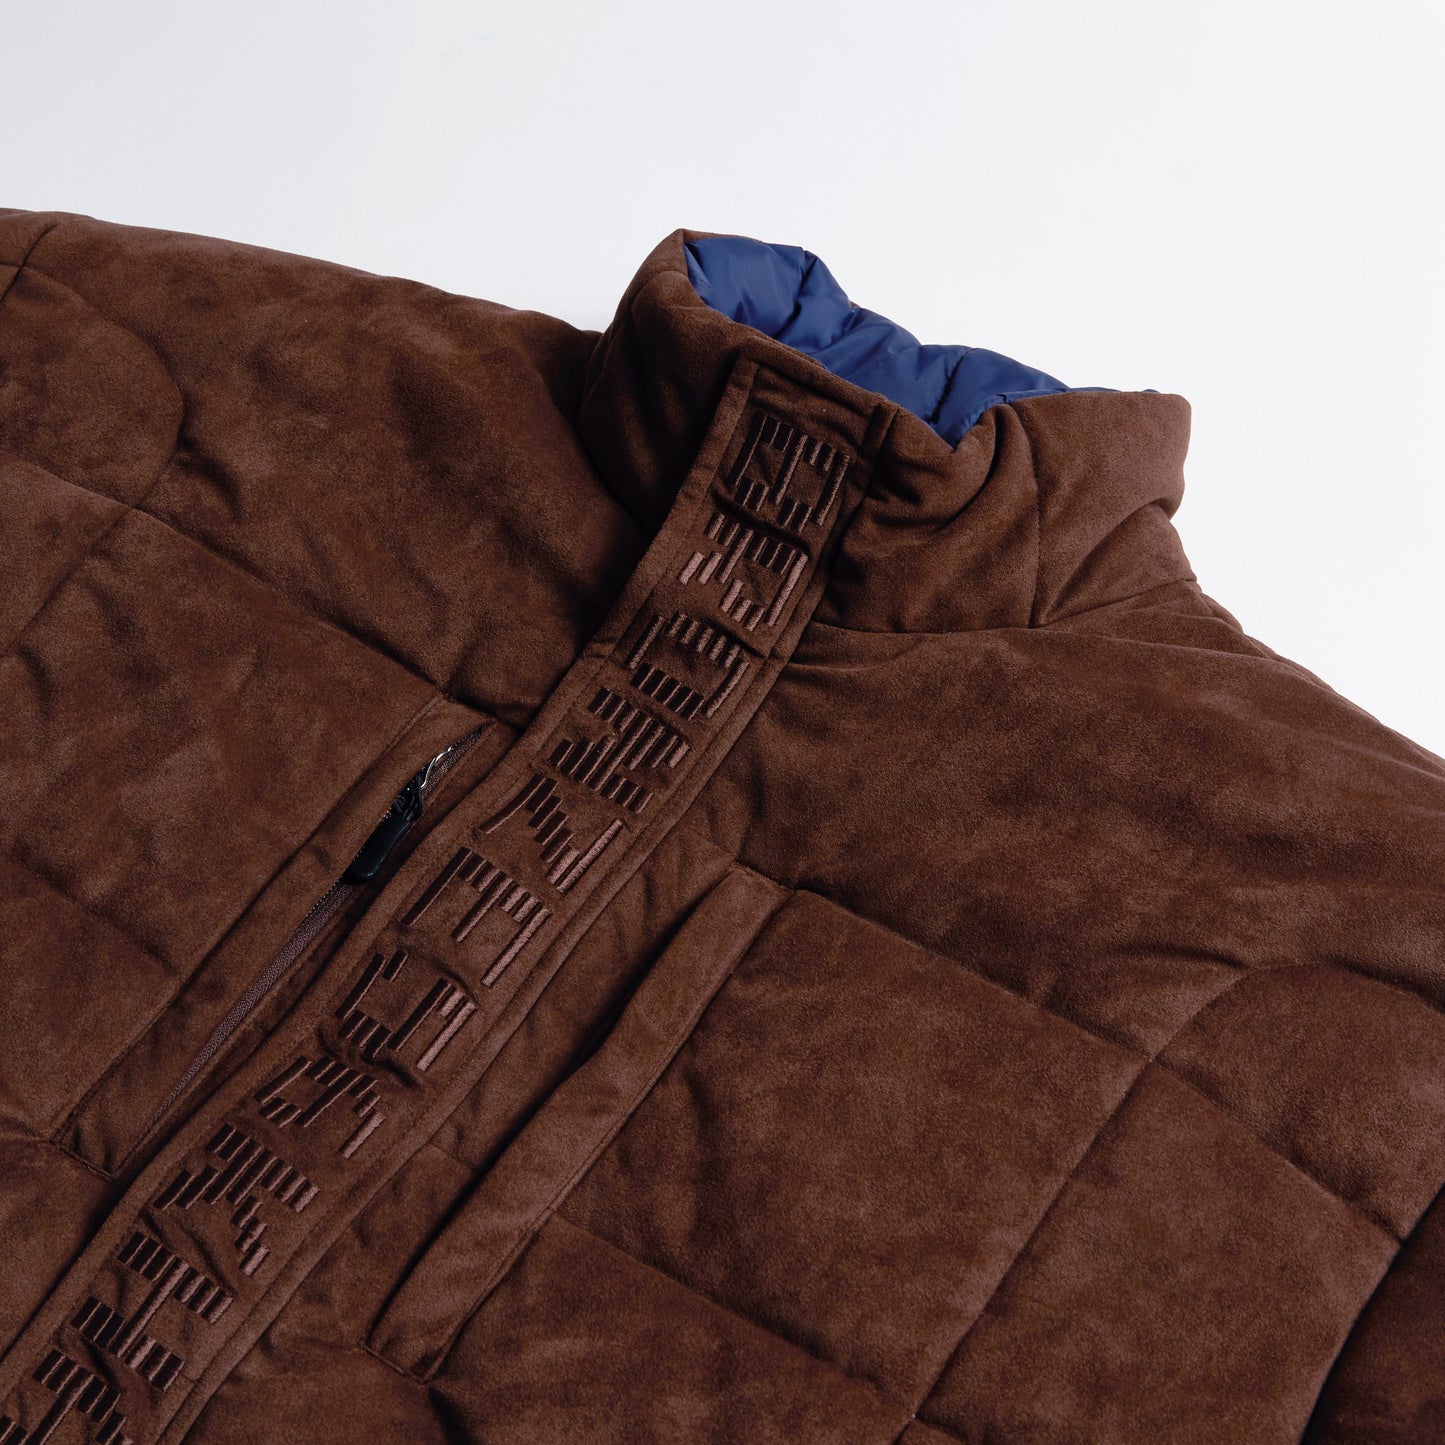 FAUX SUEDE PUFFER JACKET BROWN